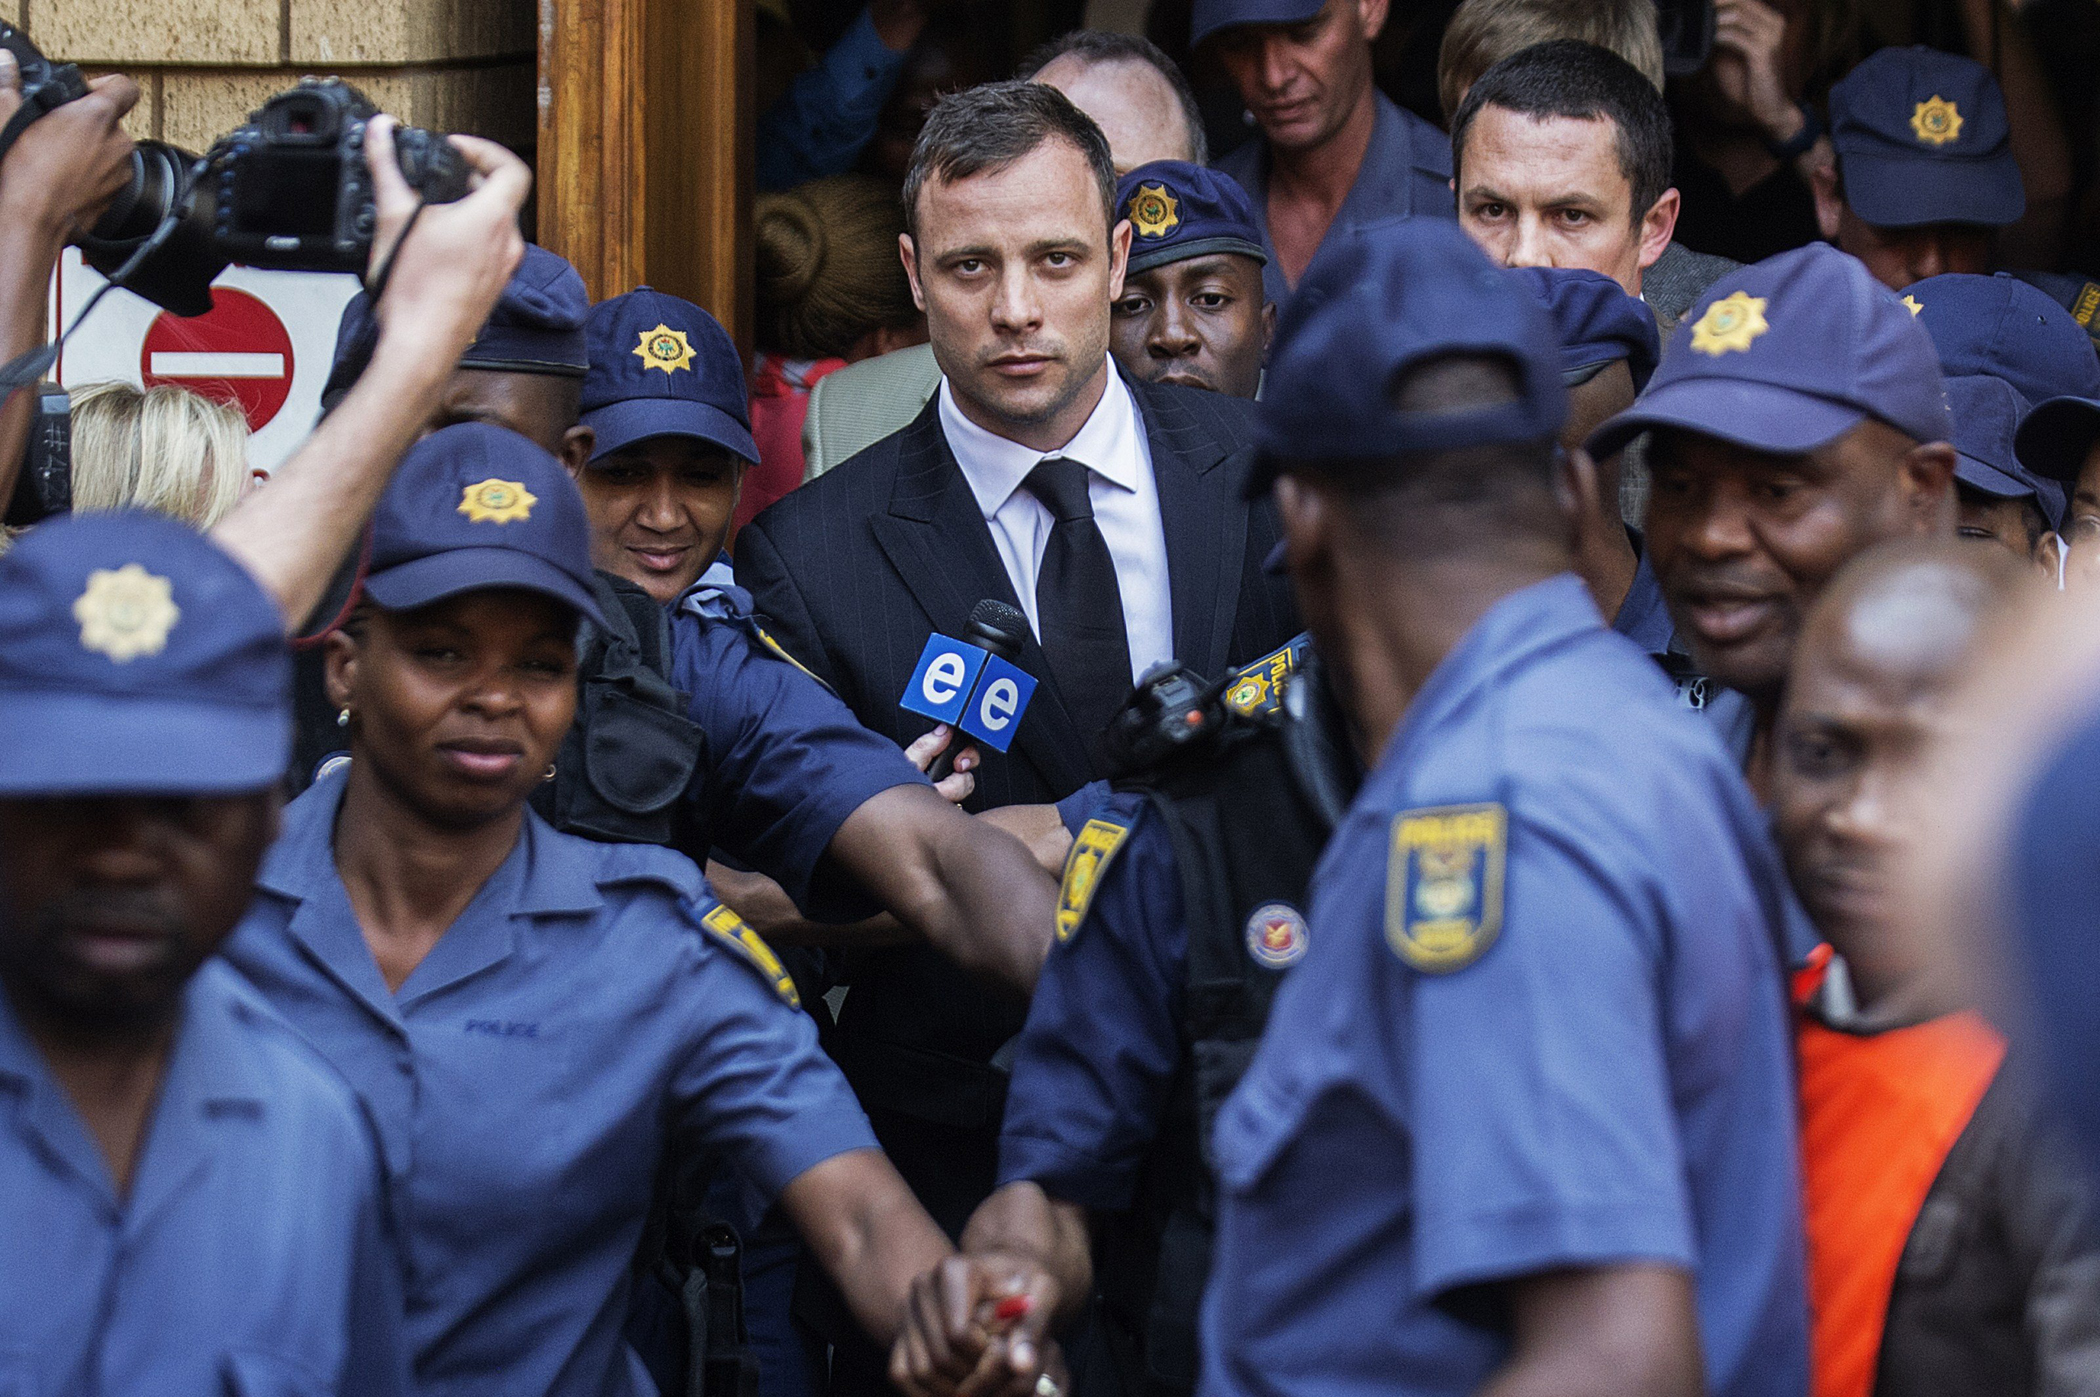 South African Paralympian athlete Oscar Pistorius leaves the High Court in Pretoria on Sept. 12, 2014 after the verdict in his murder trial where he was found guilty of culpable homicide.